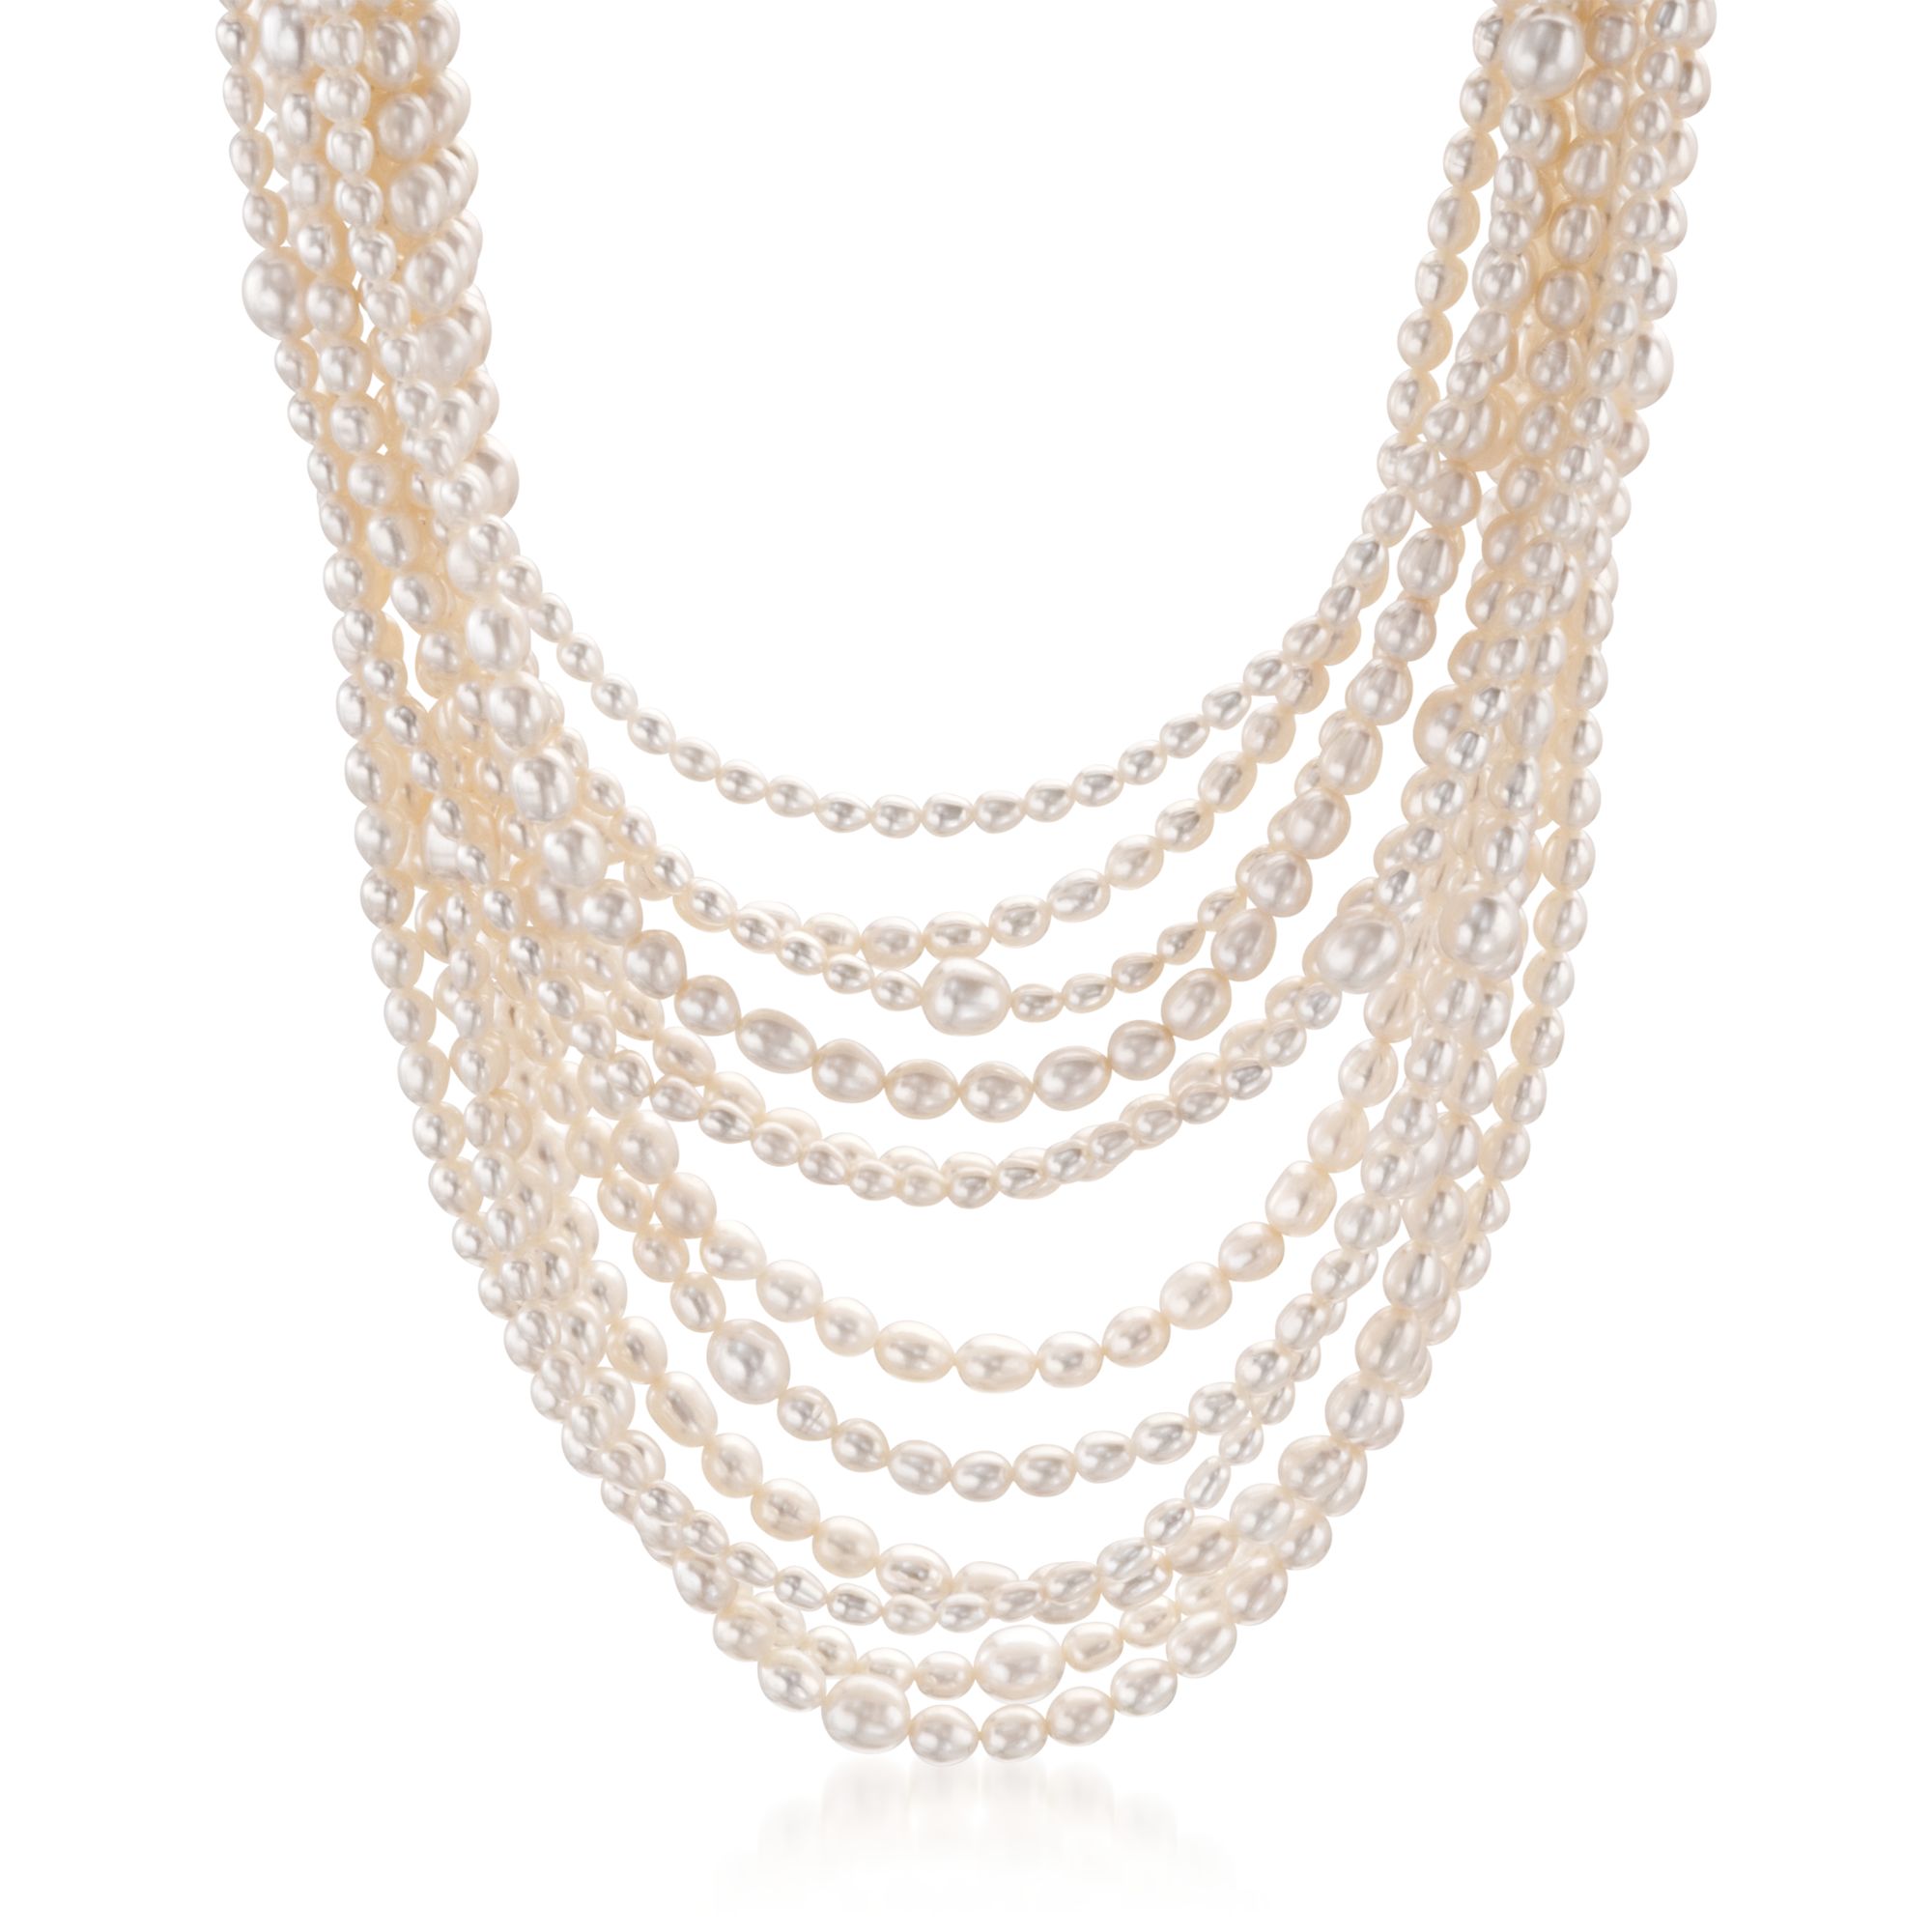 3 Strand Pearl Necklace with Flower Clasp – PEM Shop